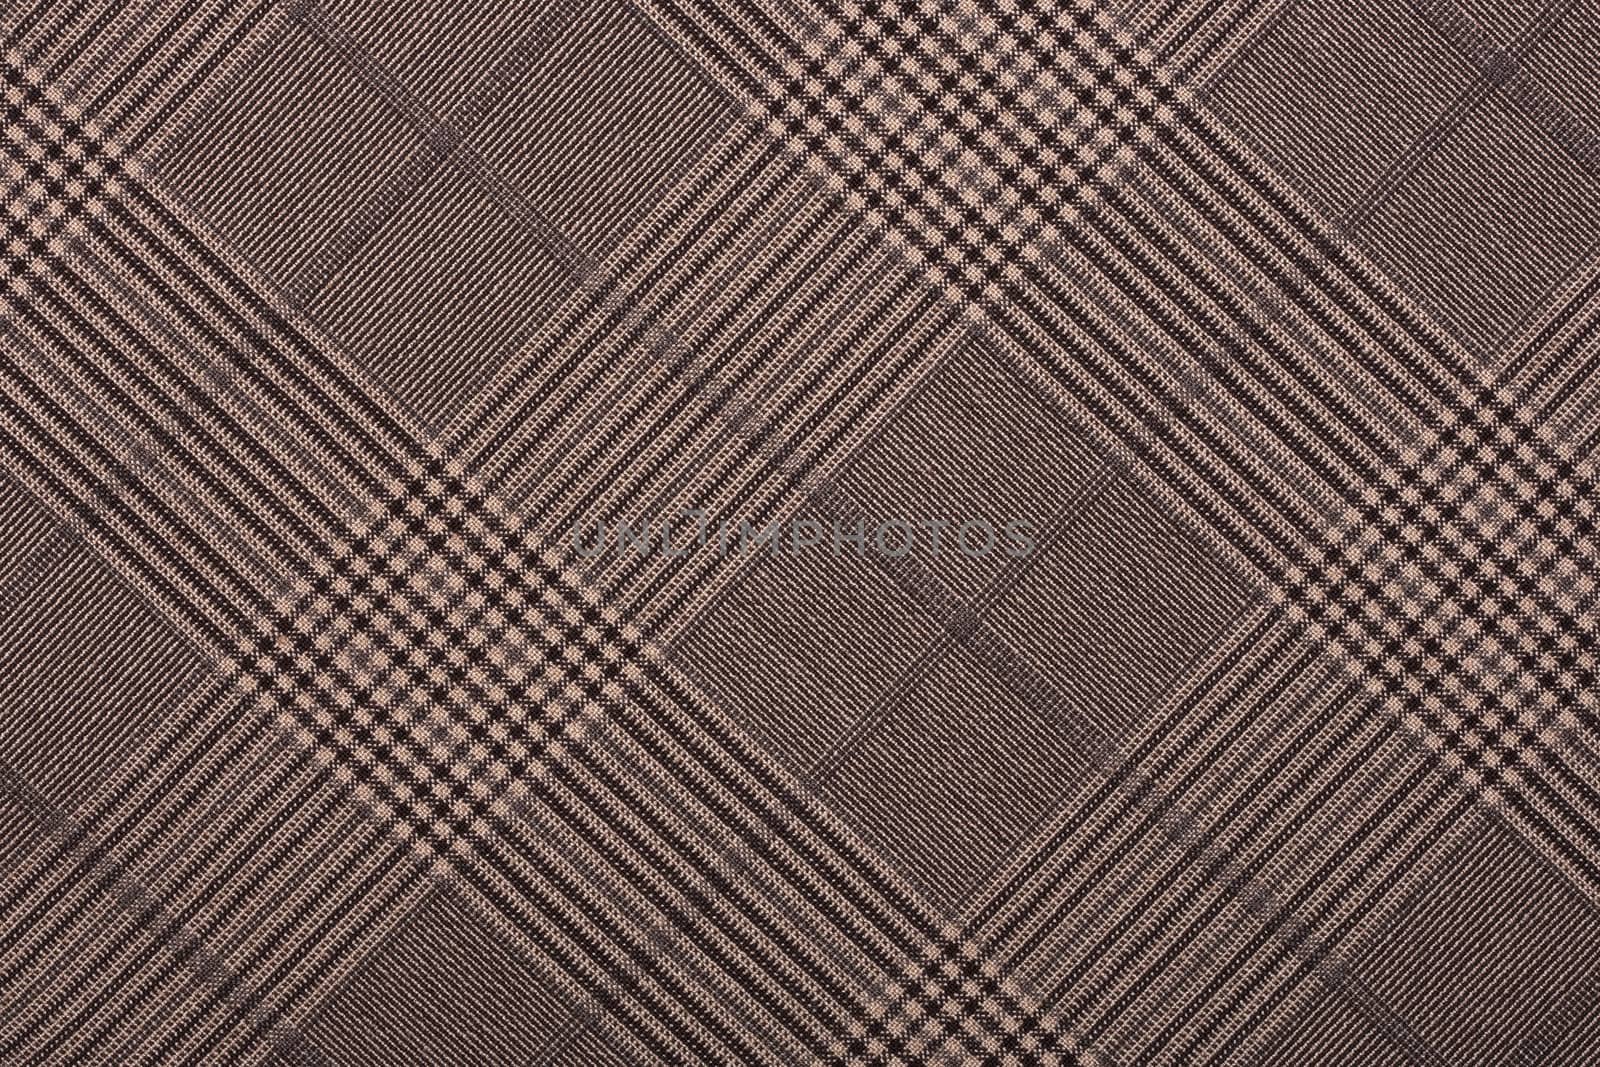 Brown material in geometric patterns, a background or texture